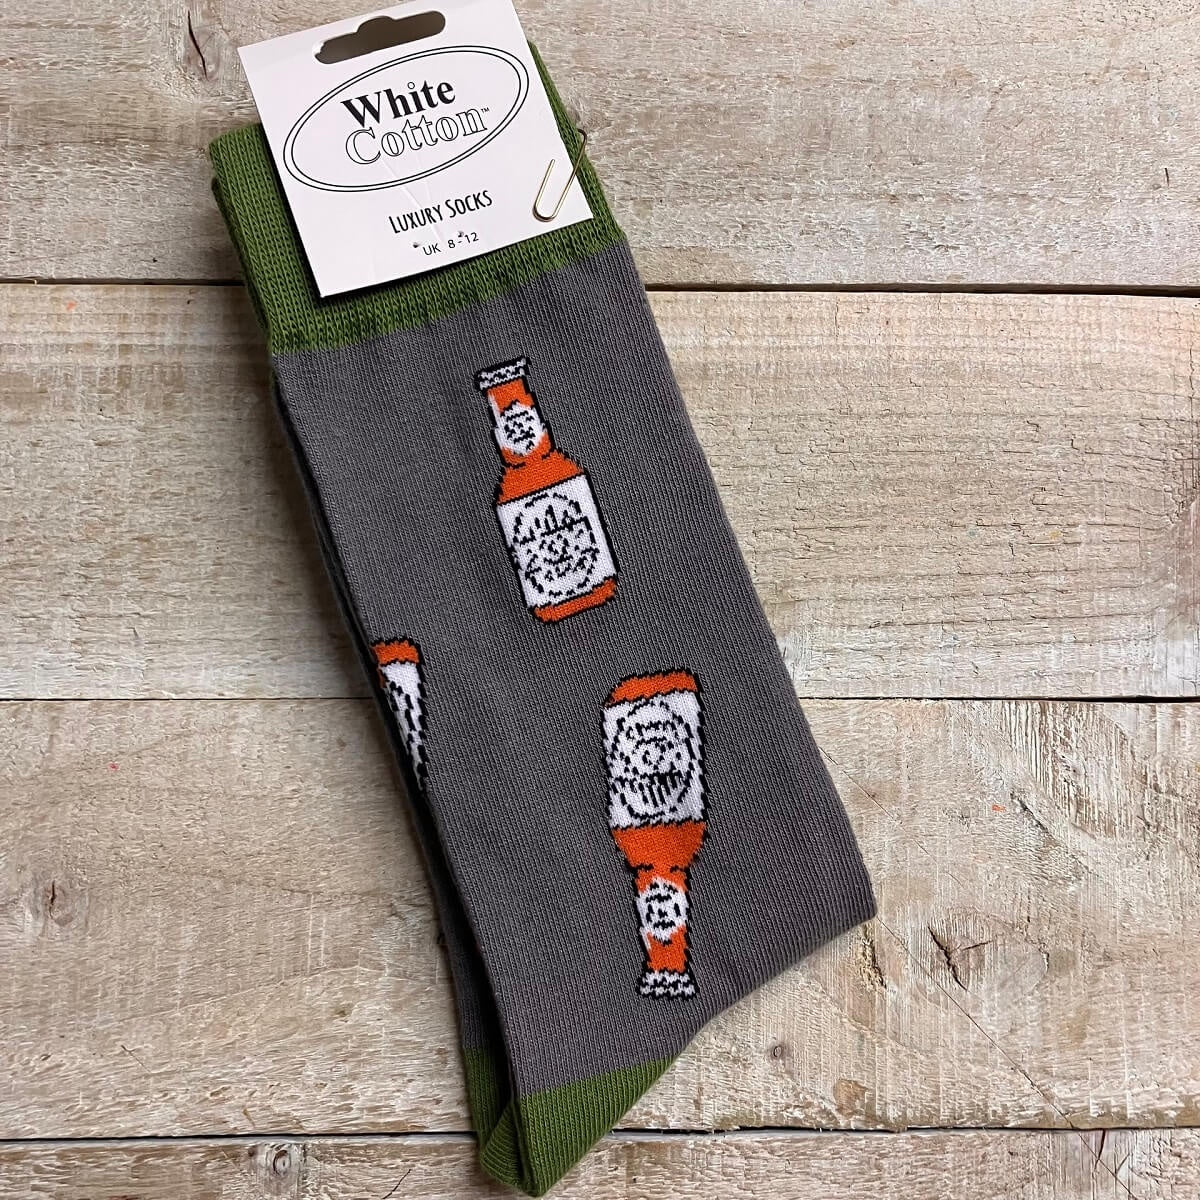 Mens beer bottle cotton socks Fathers Day gift idea at Under the Sun Southend